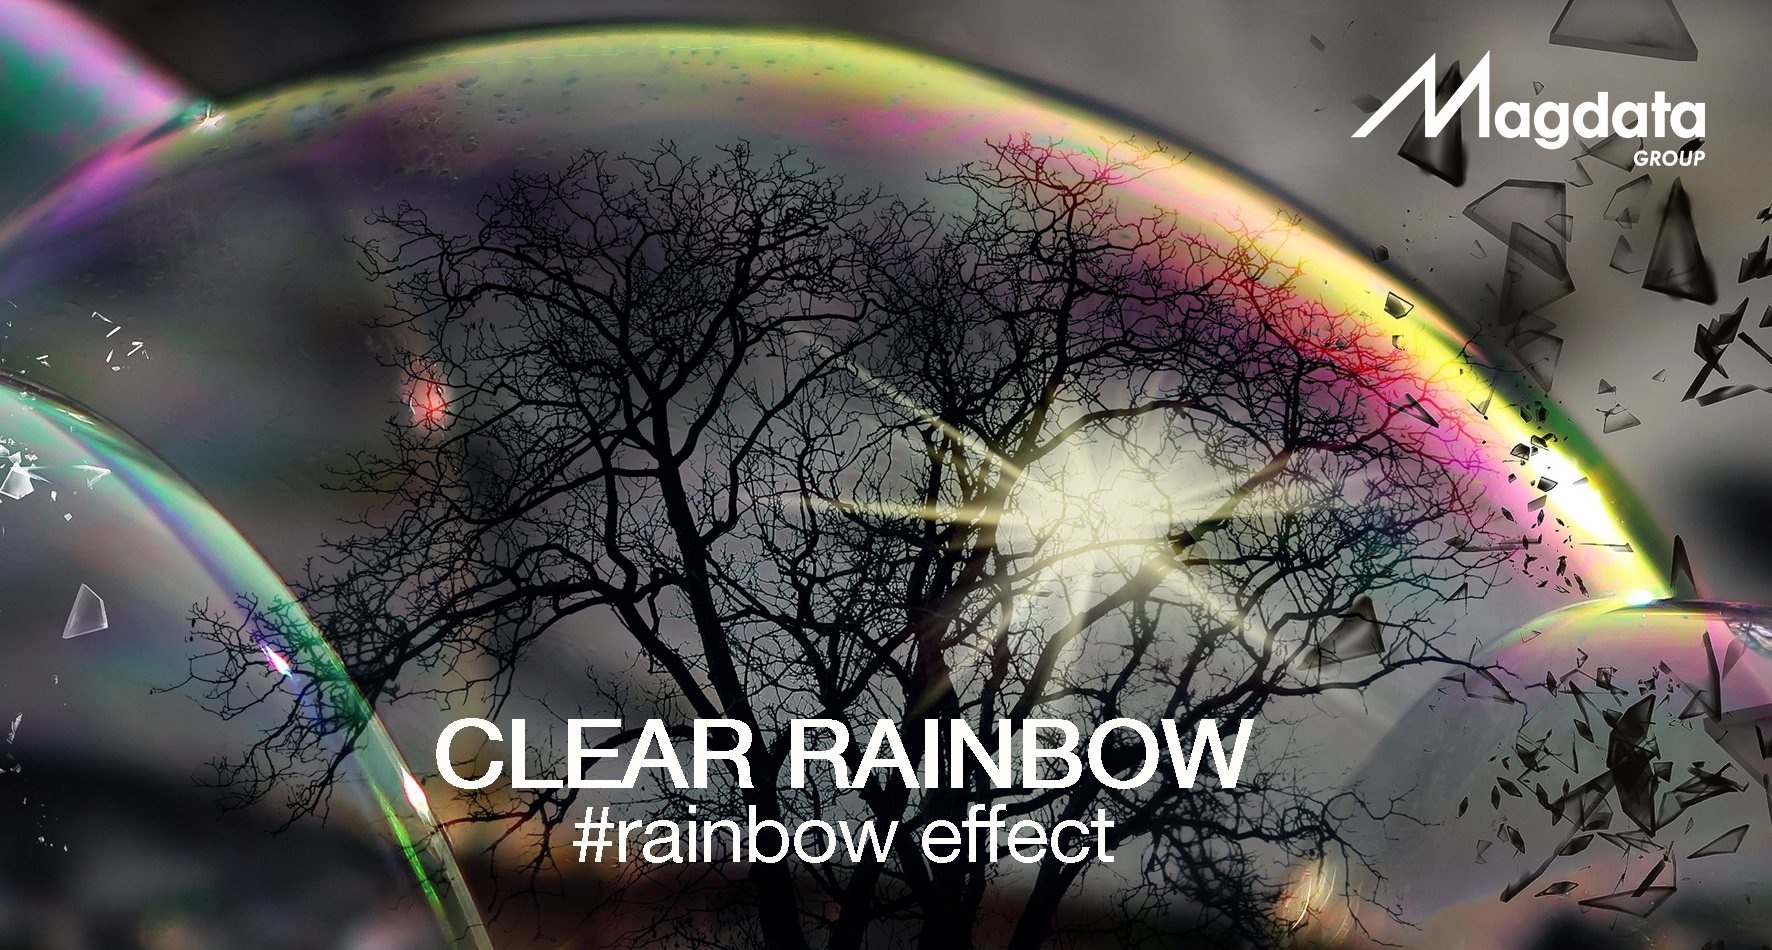 NEW CLEAR RAINBOW, a film that catches the eye...